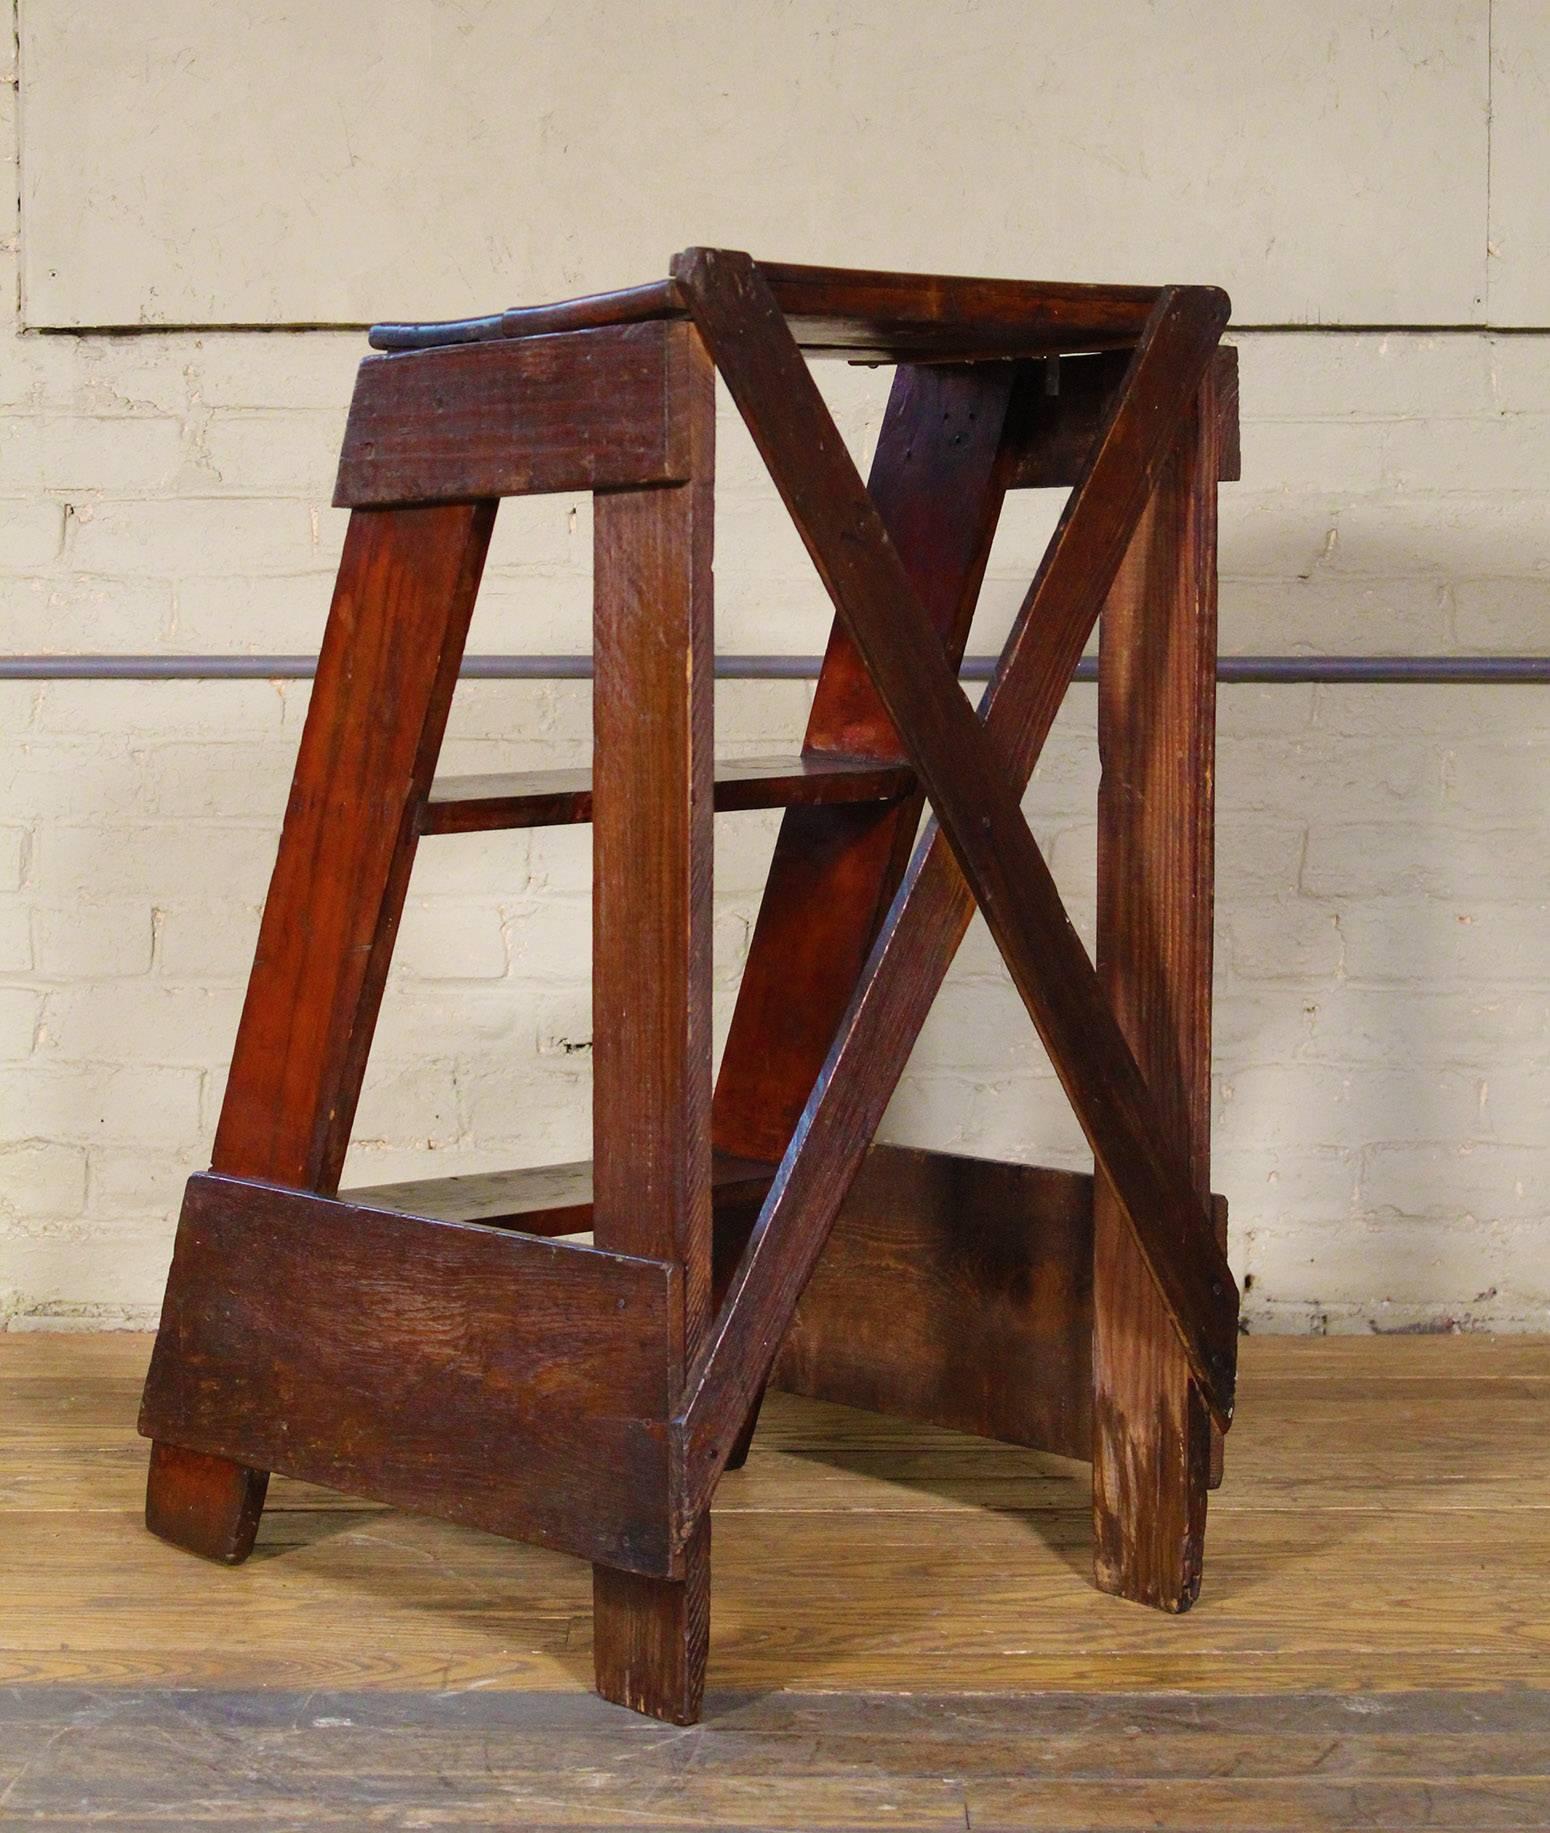 American Wooden Step Ladder Vintage Antique Moveable Wood Factory Shop Ladder Stairs